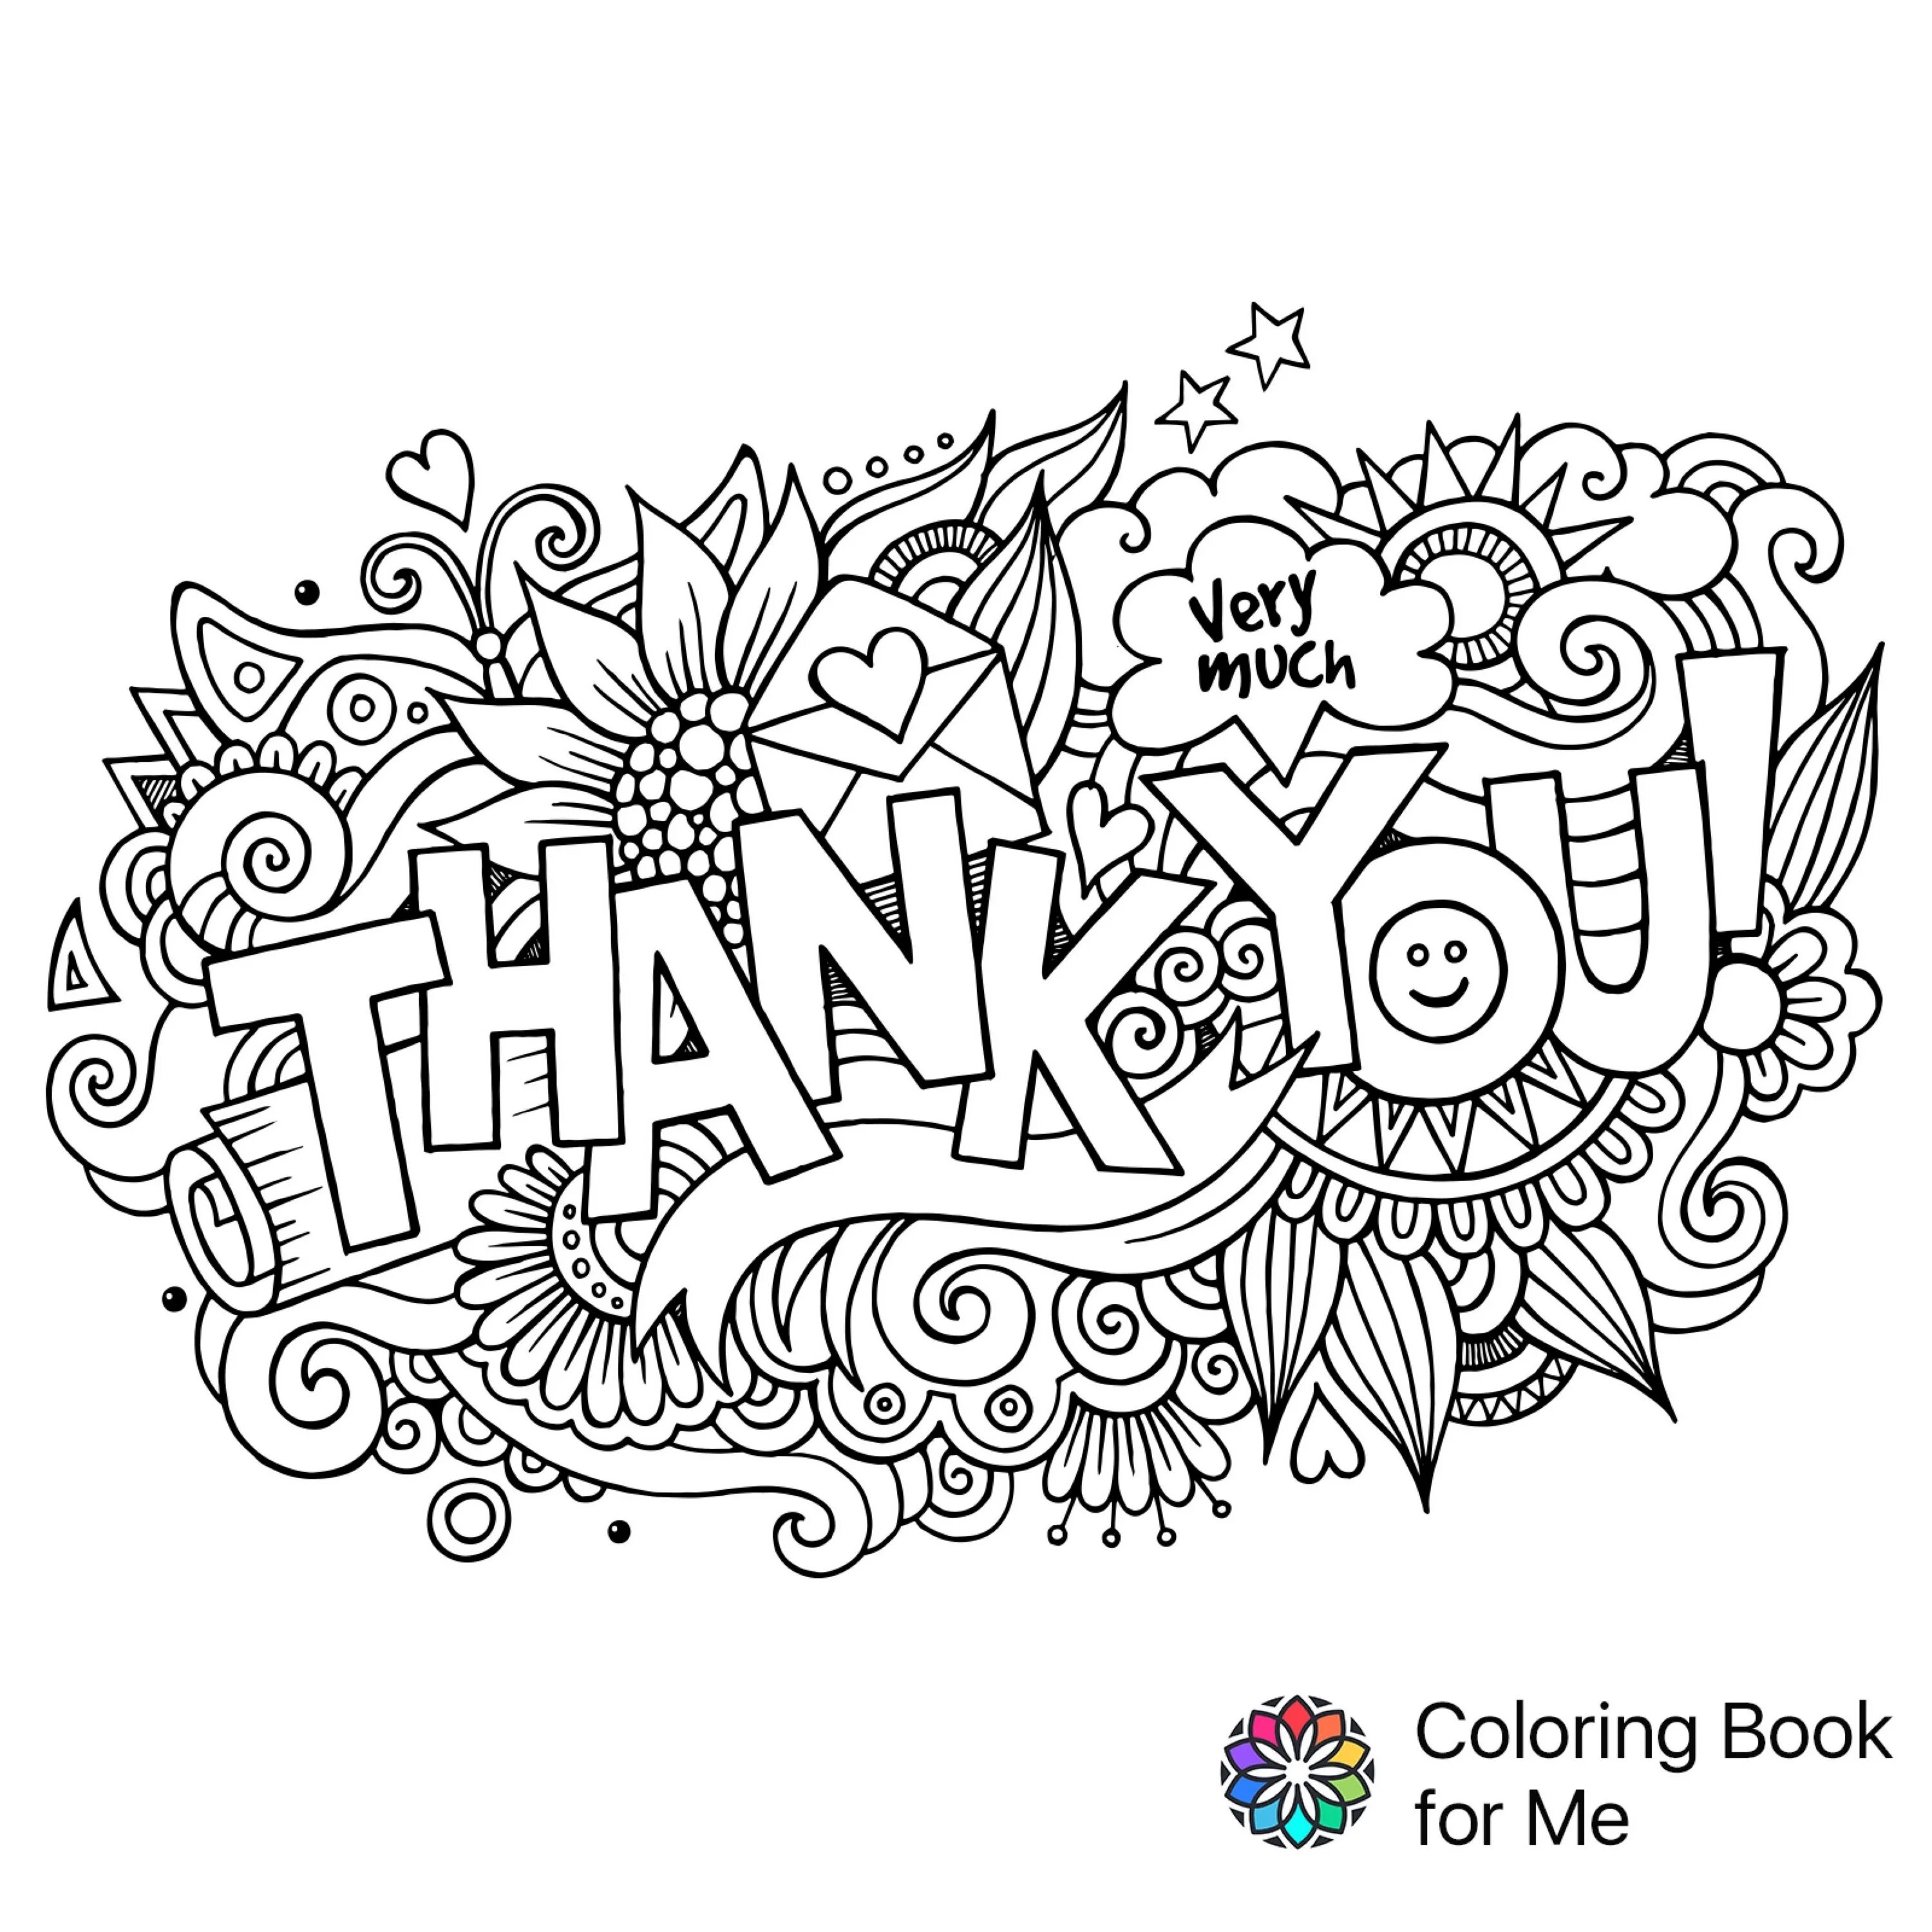 Wonderful antistress coloring book with inscriptions